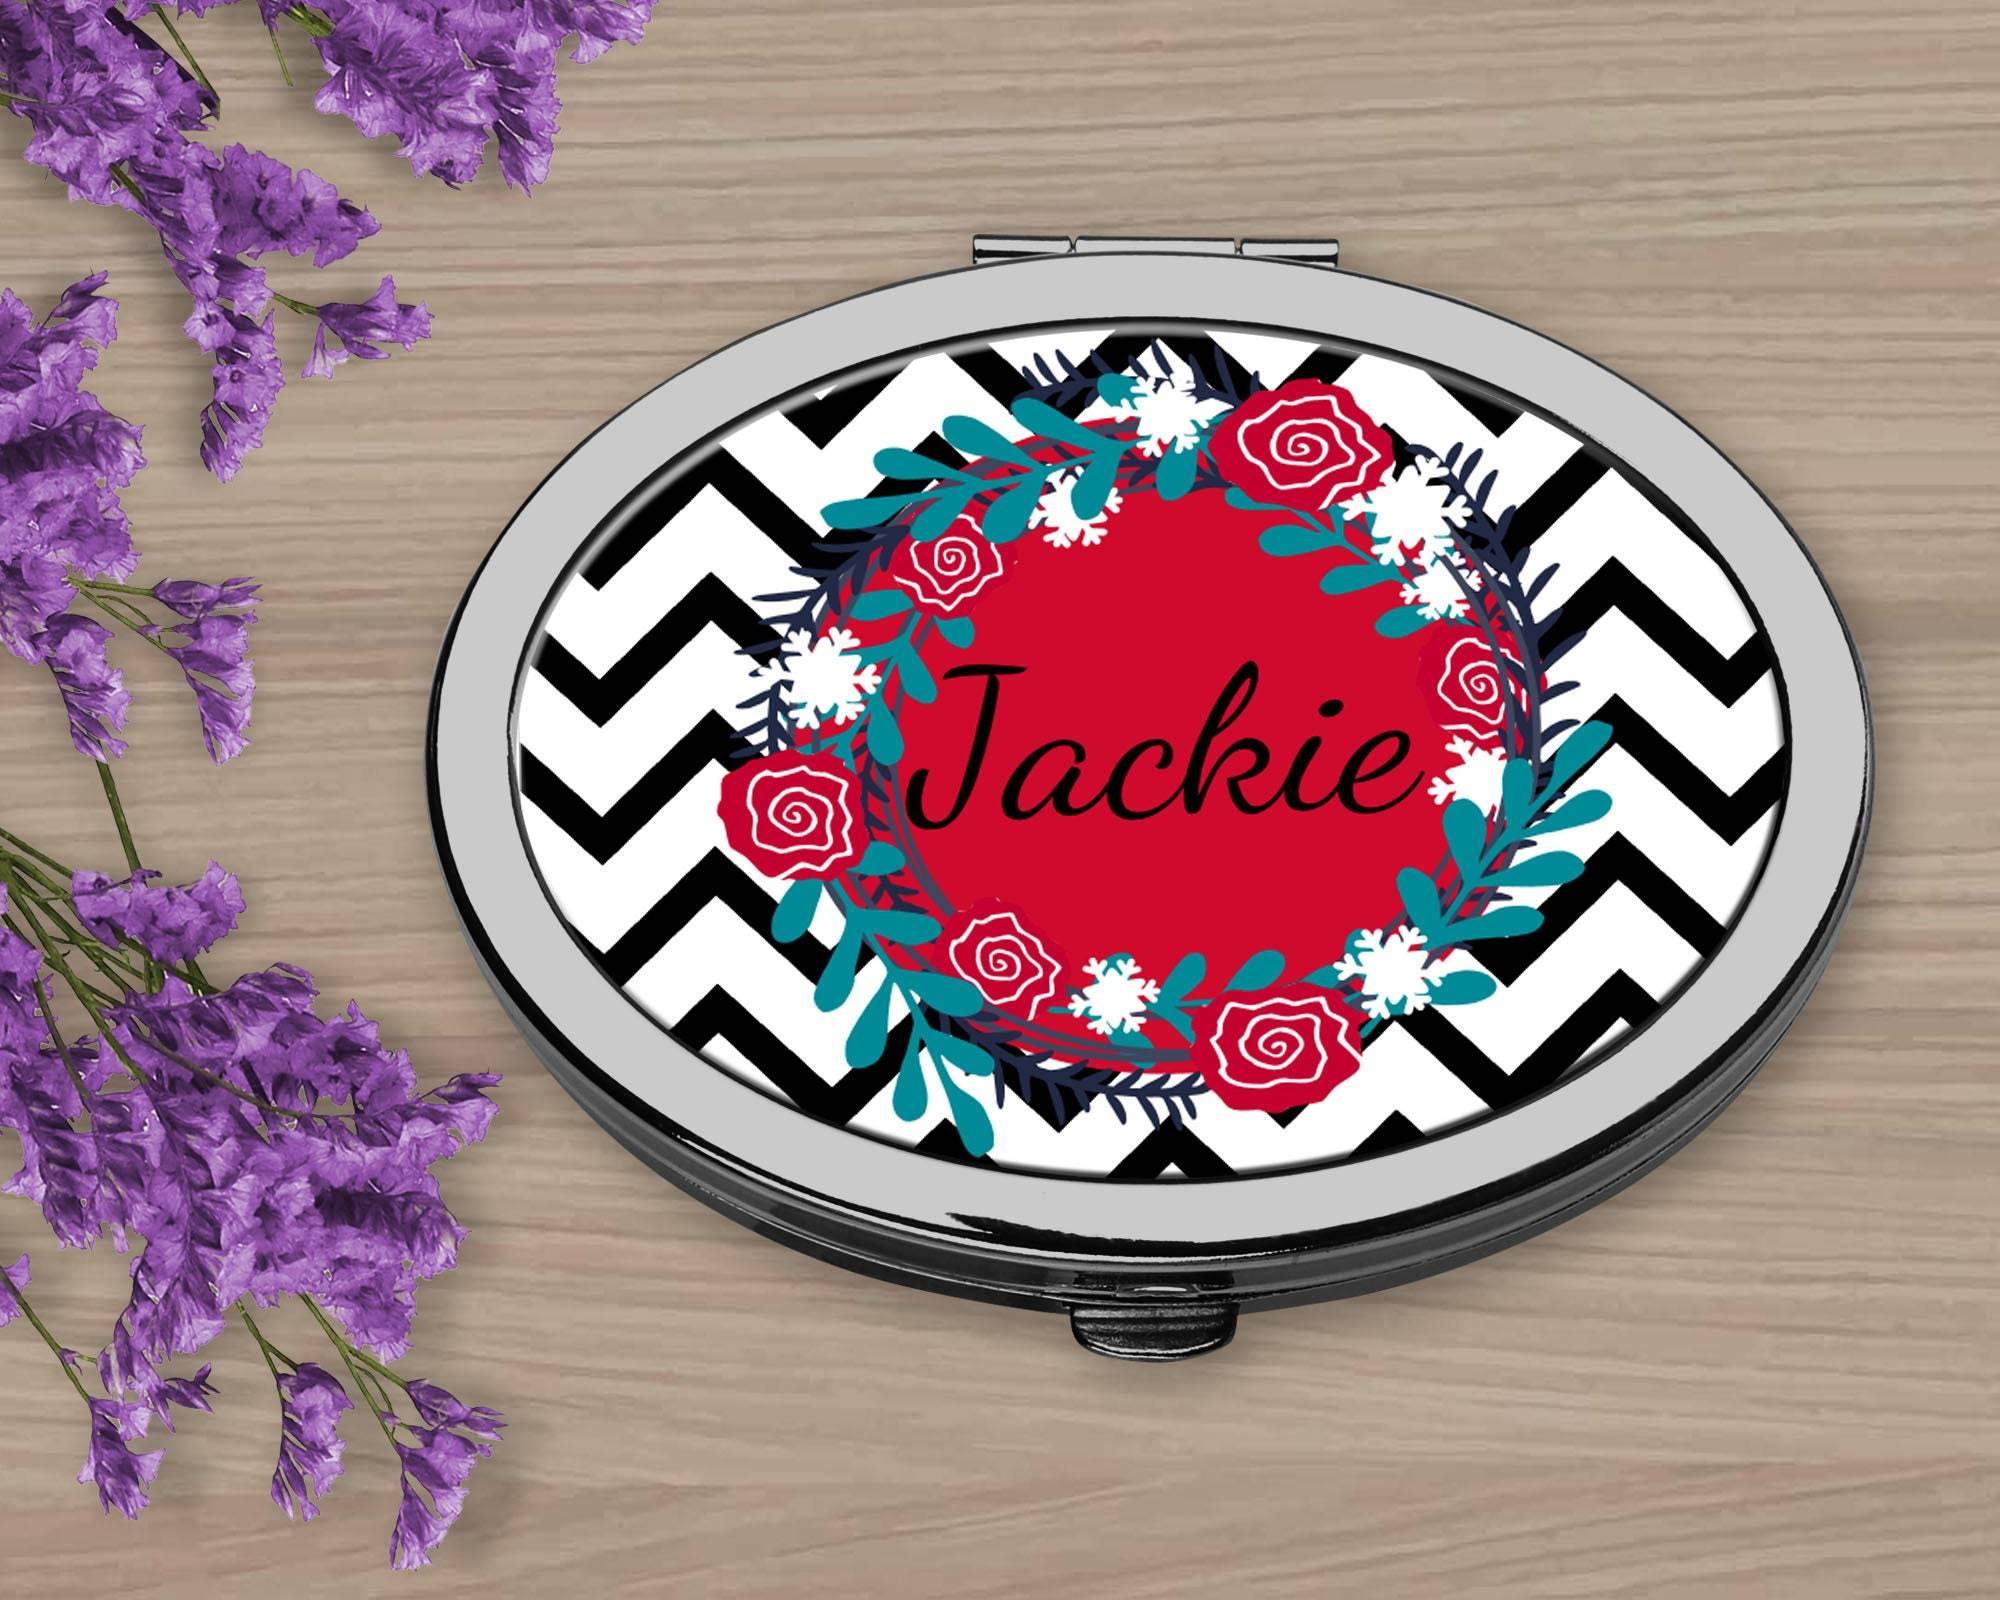 Personalized Compacts | Custom Compacts | Makeup & Cosmetics | Black Chevron - This & That Solutions - Personalized Compacts | Custom Compacts | Makeup & Cosmetics | Black Chevron - Personalized Gifts & Custom Home Decor